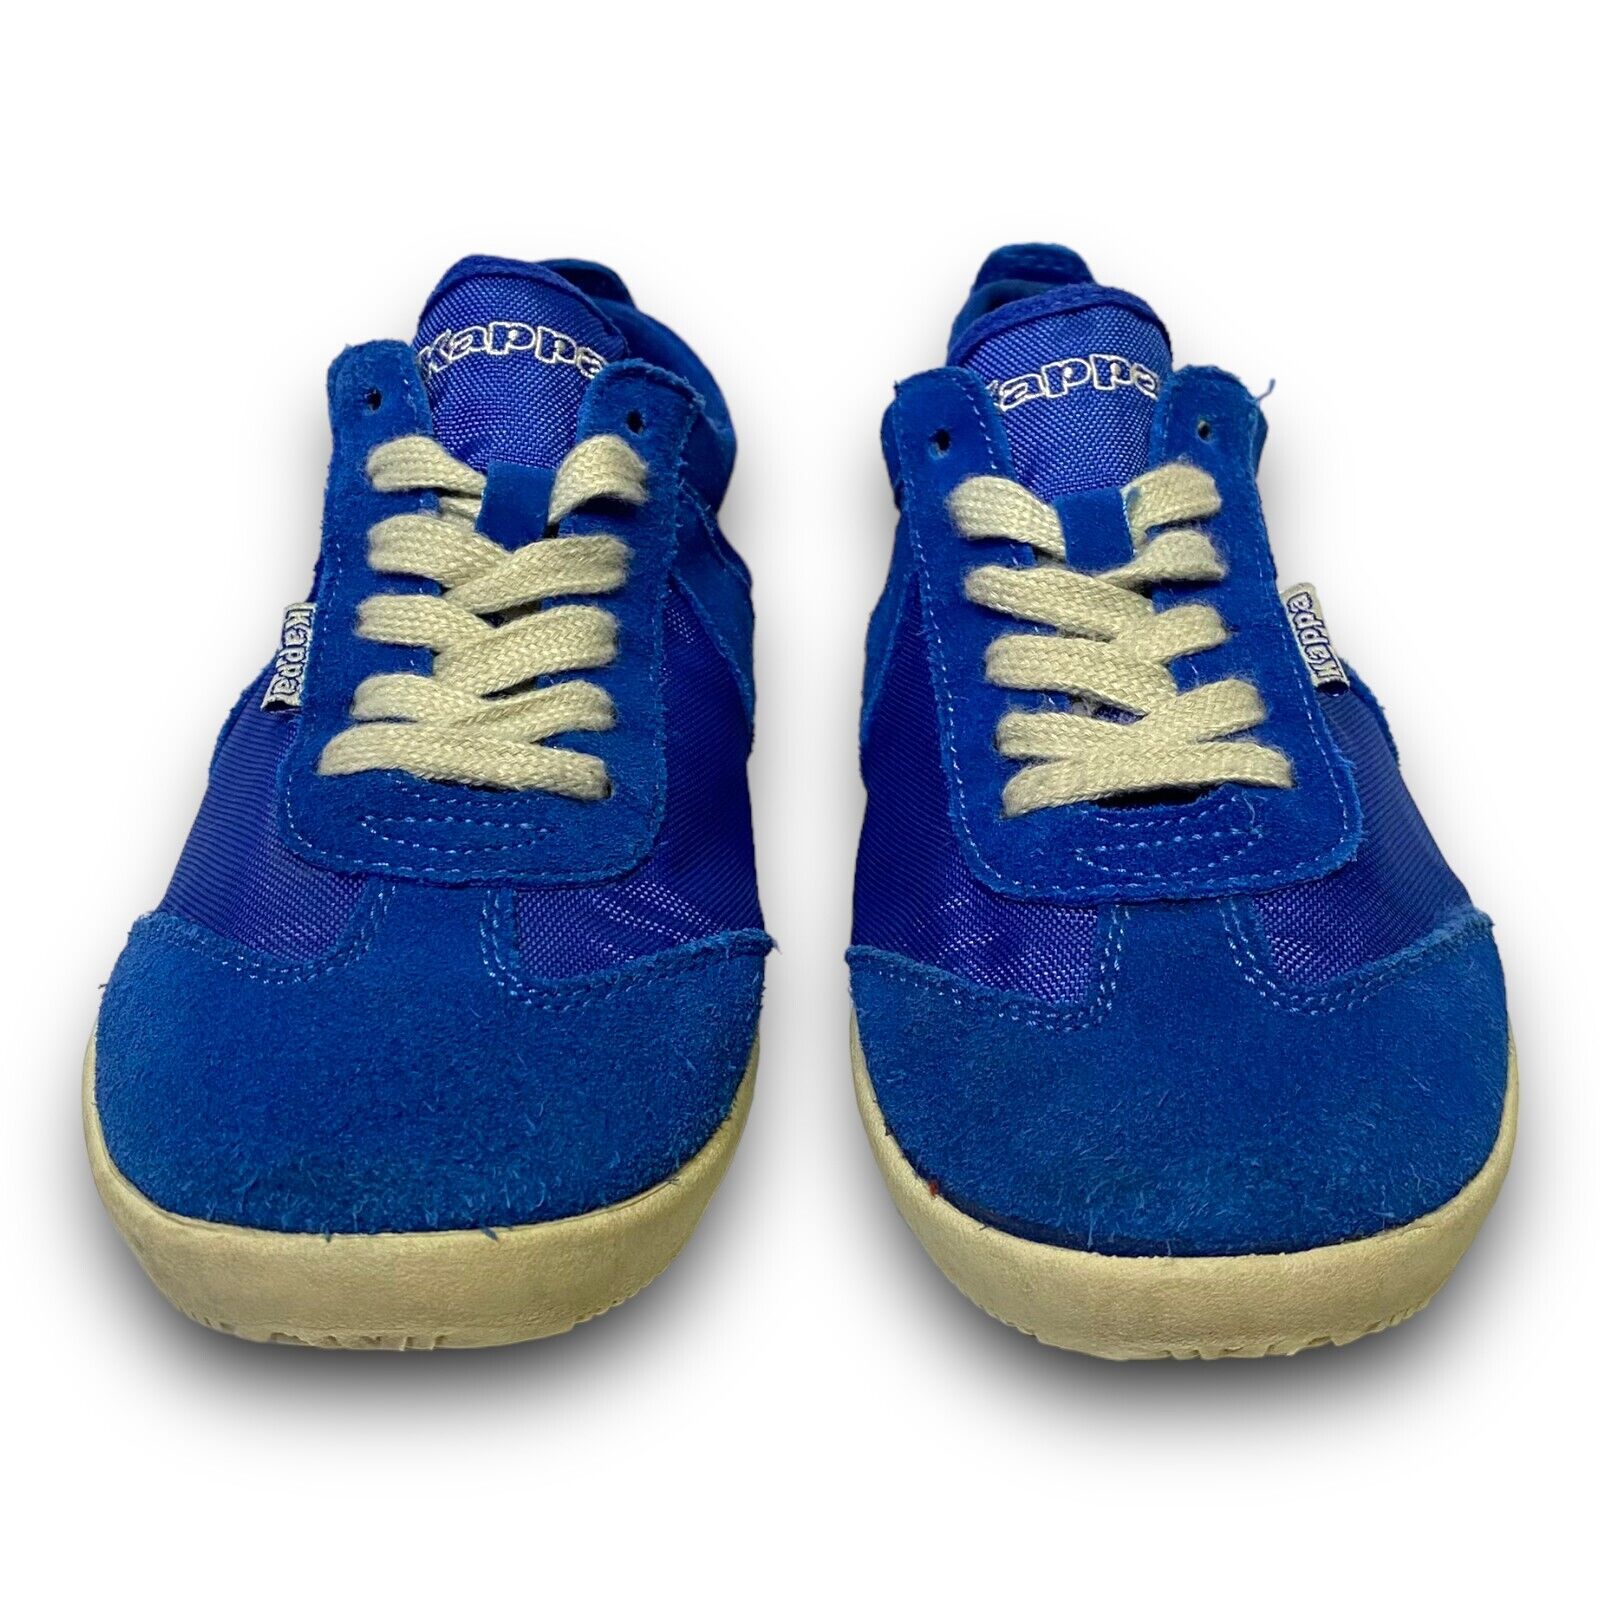 Kappa Mens Vintage 90s Blue Suede Logo Lace Up Shoes Sneakers Size 7 US  Rare | eBay